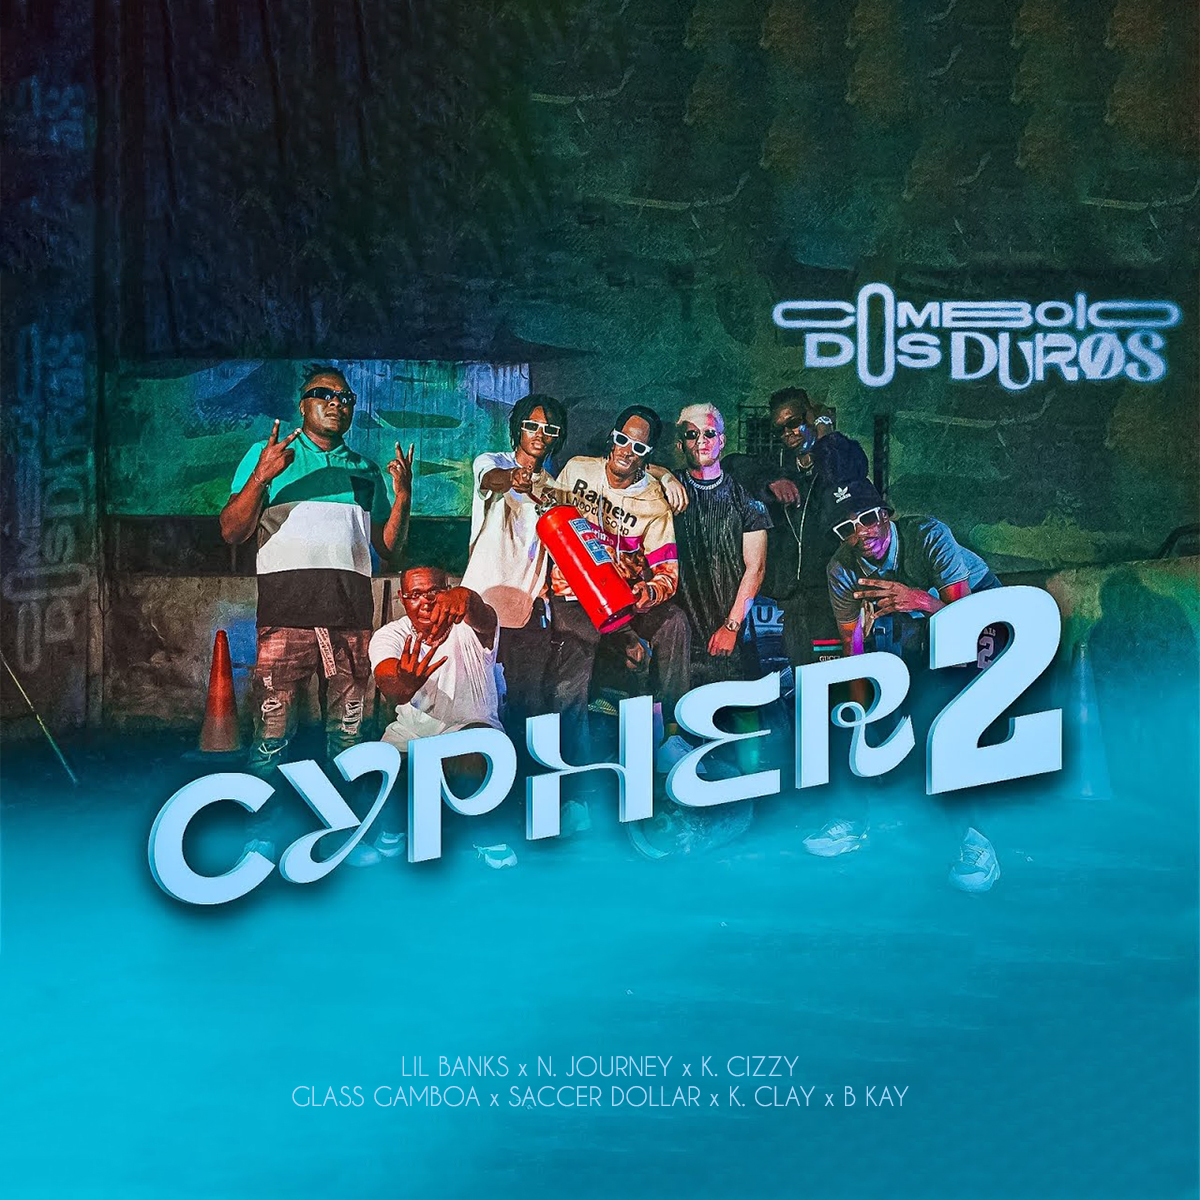 Lil Banks, NickoJOURNEY, King Cizzy, Glass Gamboa, Saccer Dollar, King Clay & B Kay – Comboio dos Duros (Cypher #2)